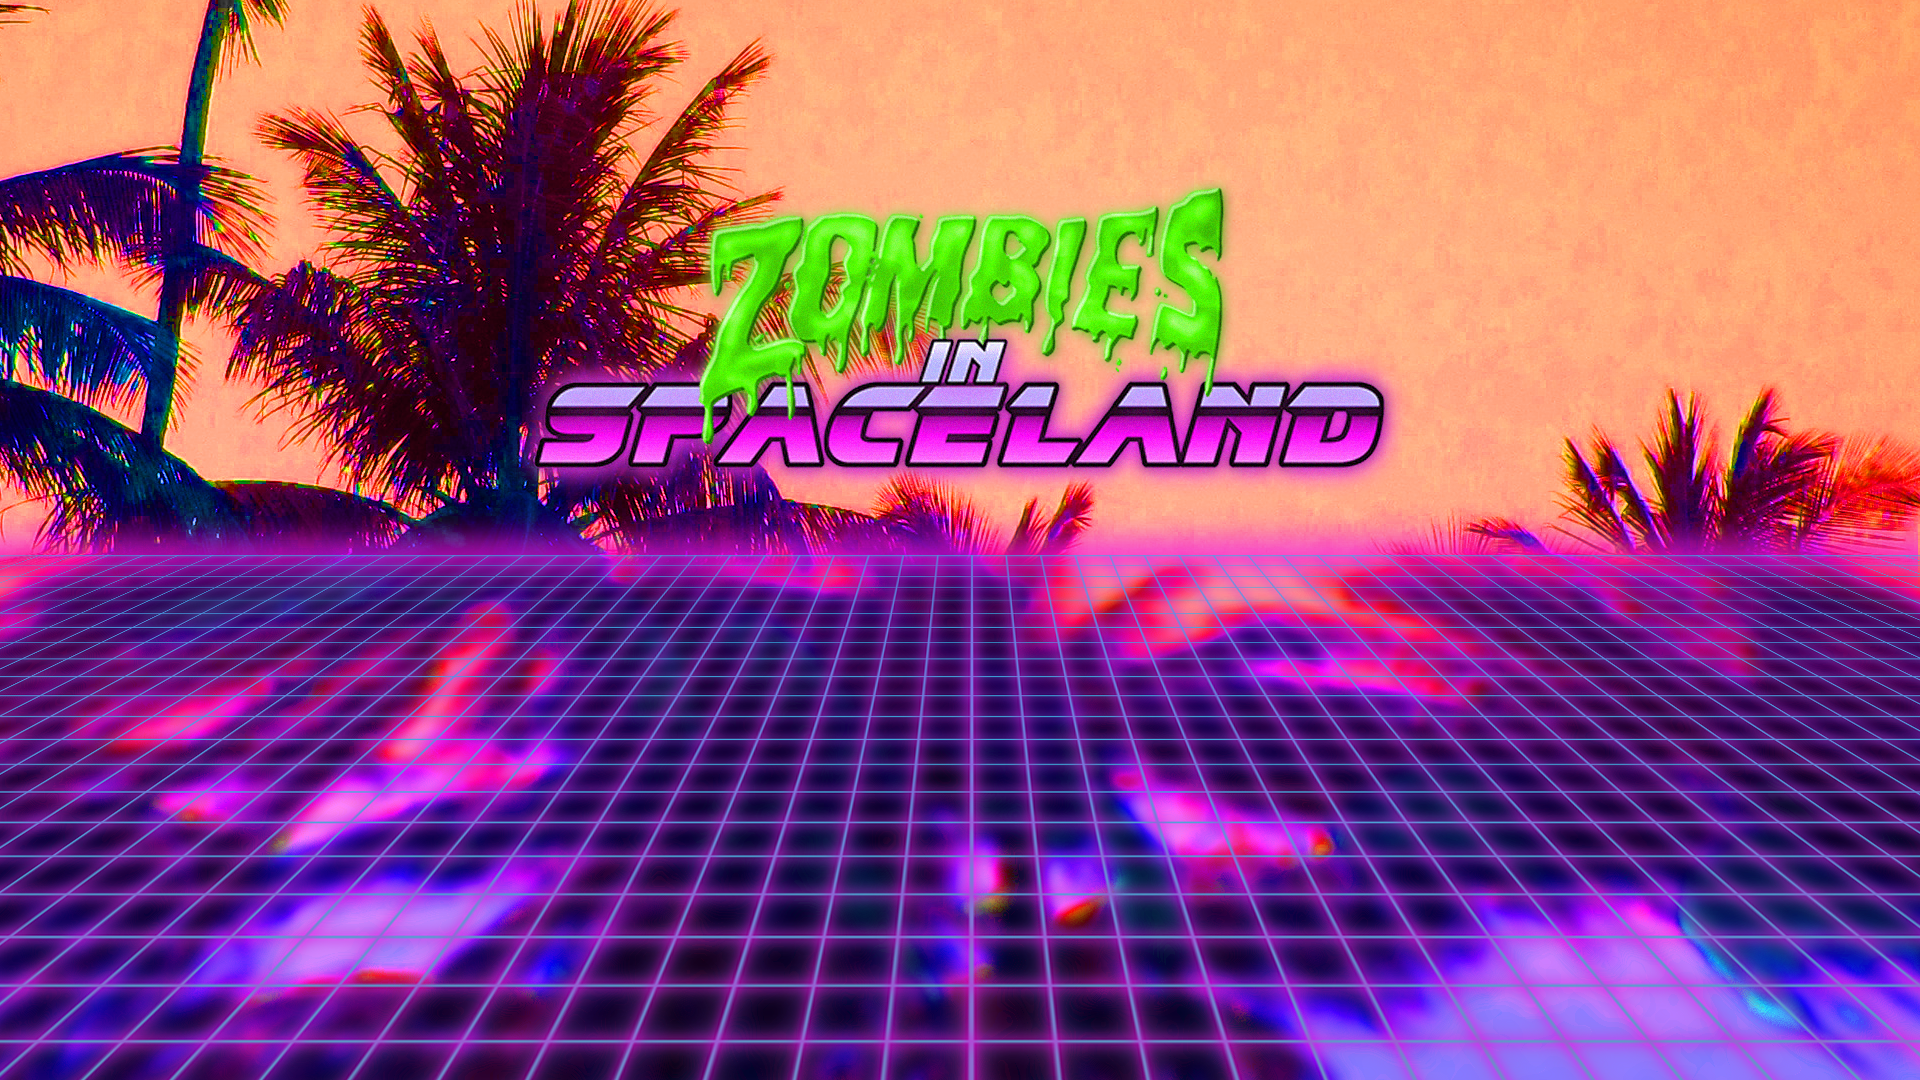 Cool Zombies in Spaceland Wallpaper I made- 1920x1080